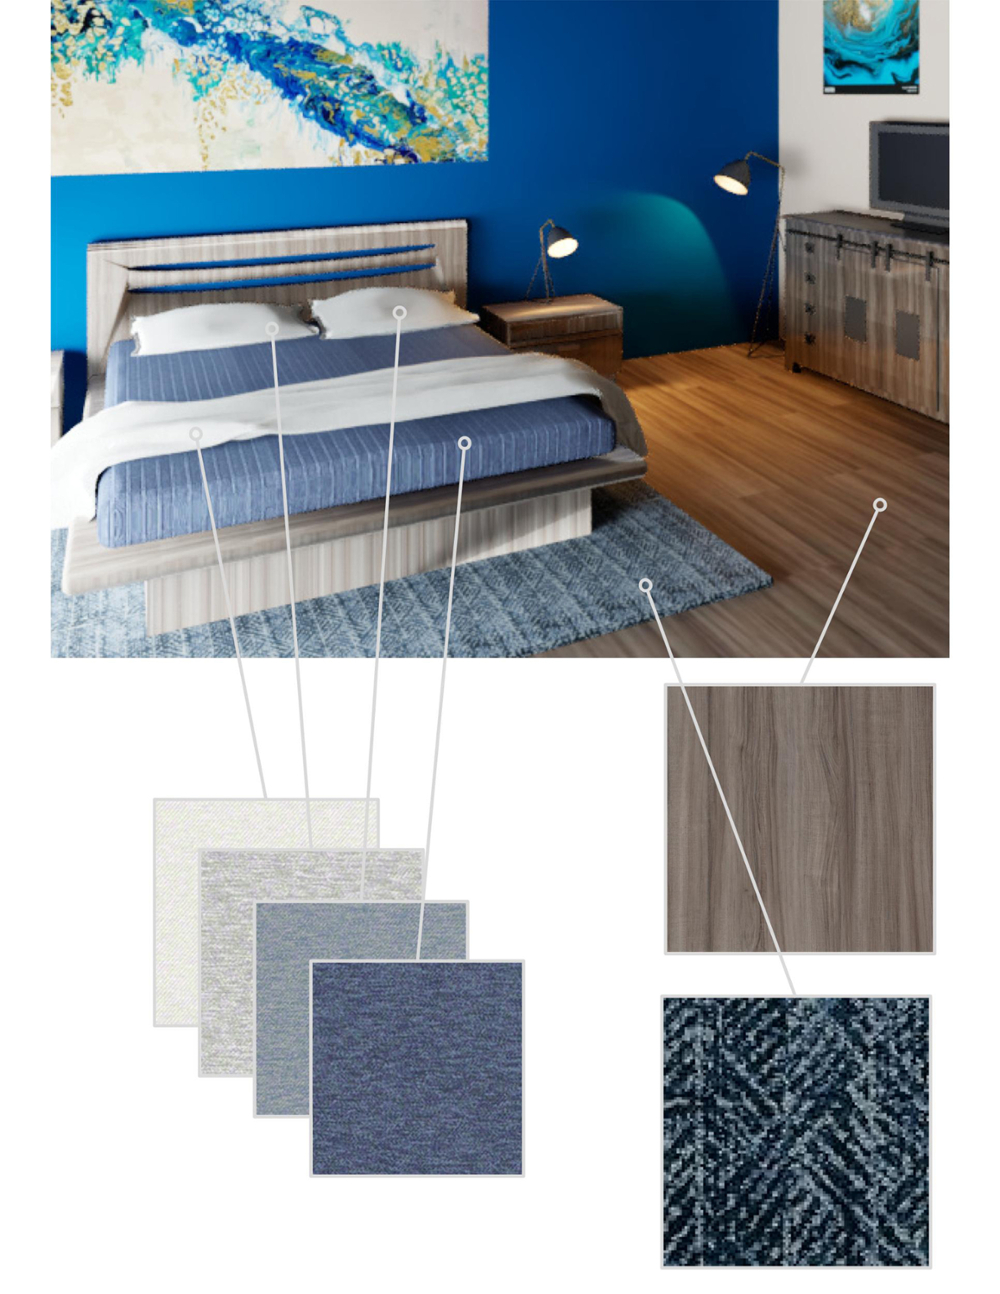 Material Examples - Bedroom Materials; fabrics, rug, and luxury vinyl tile flooring in a gray wood look.